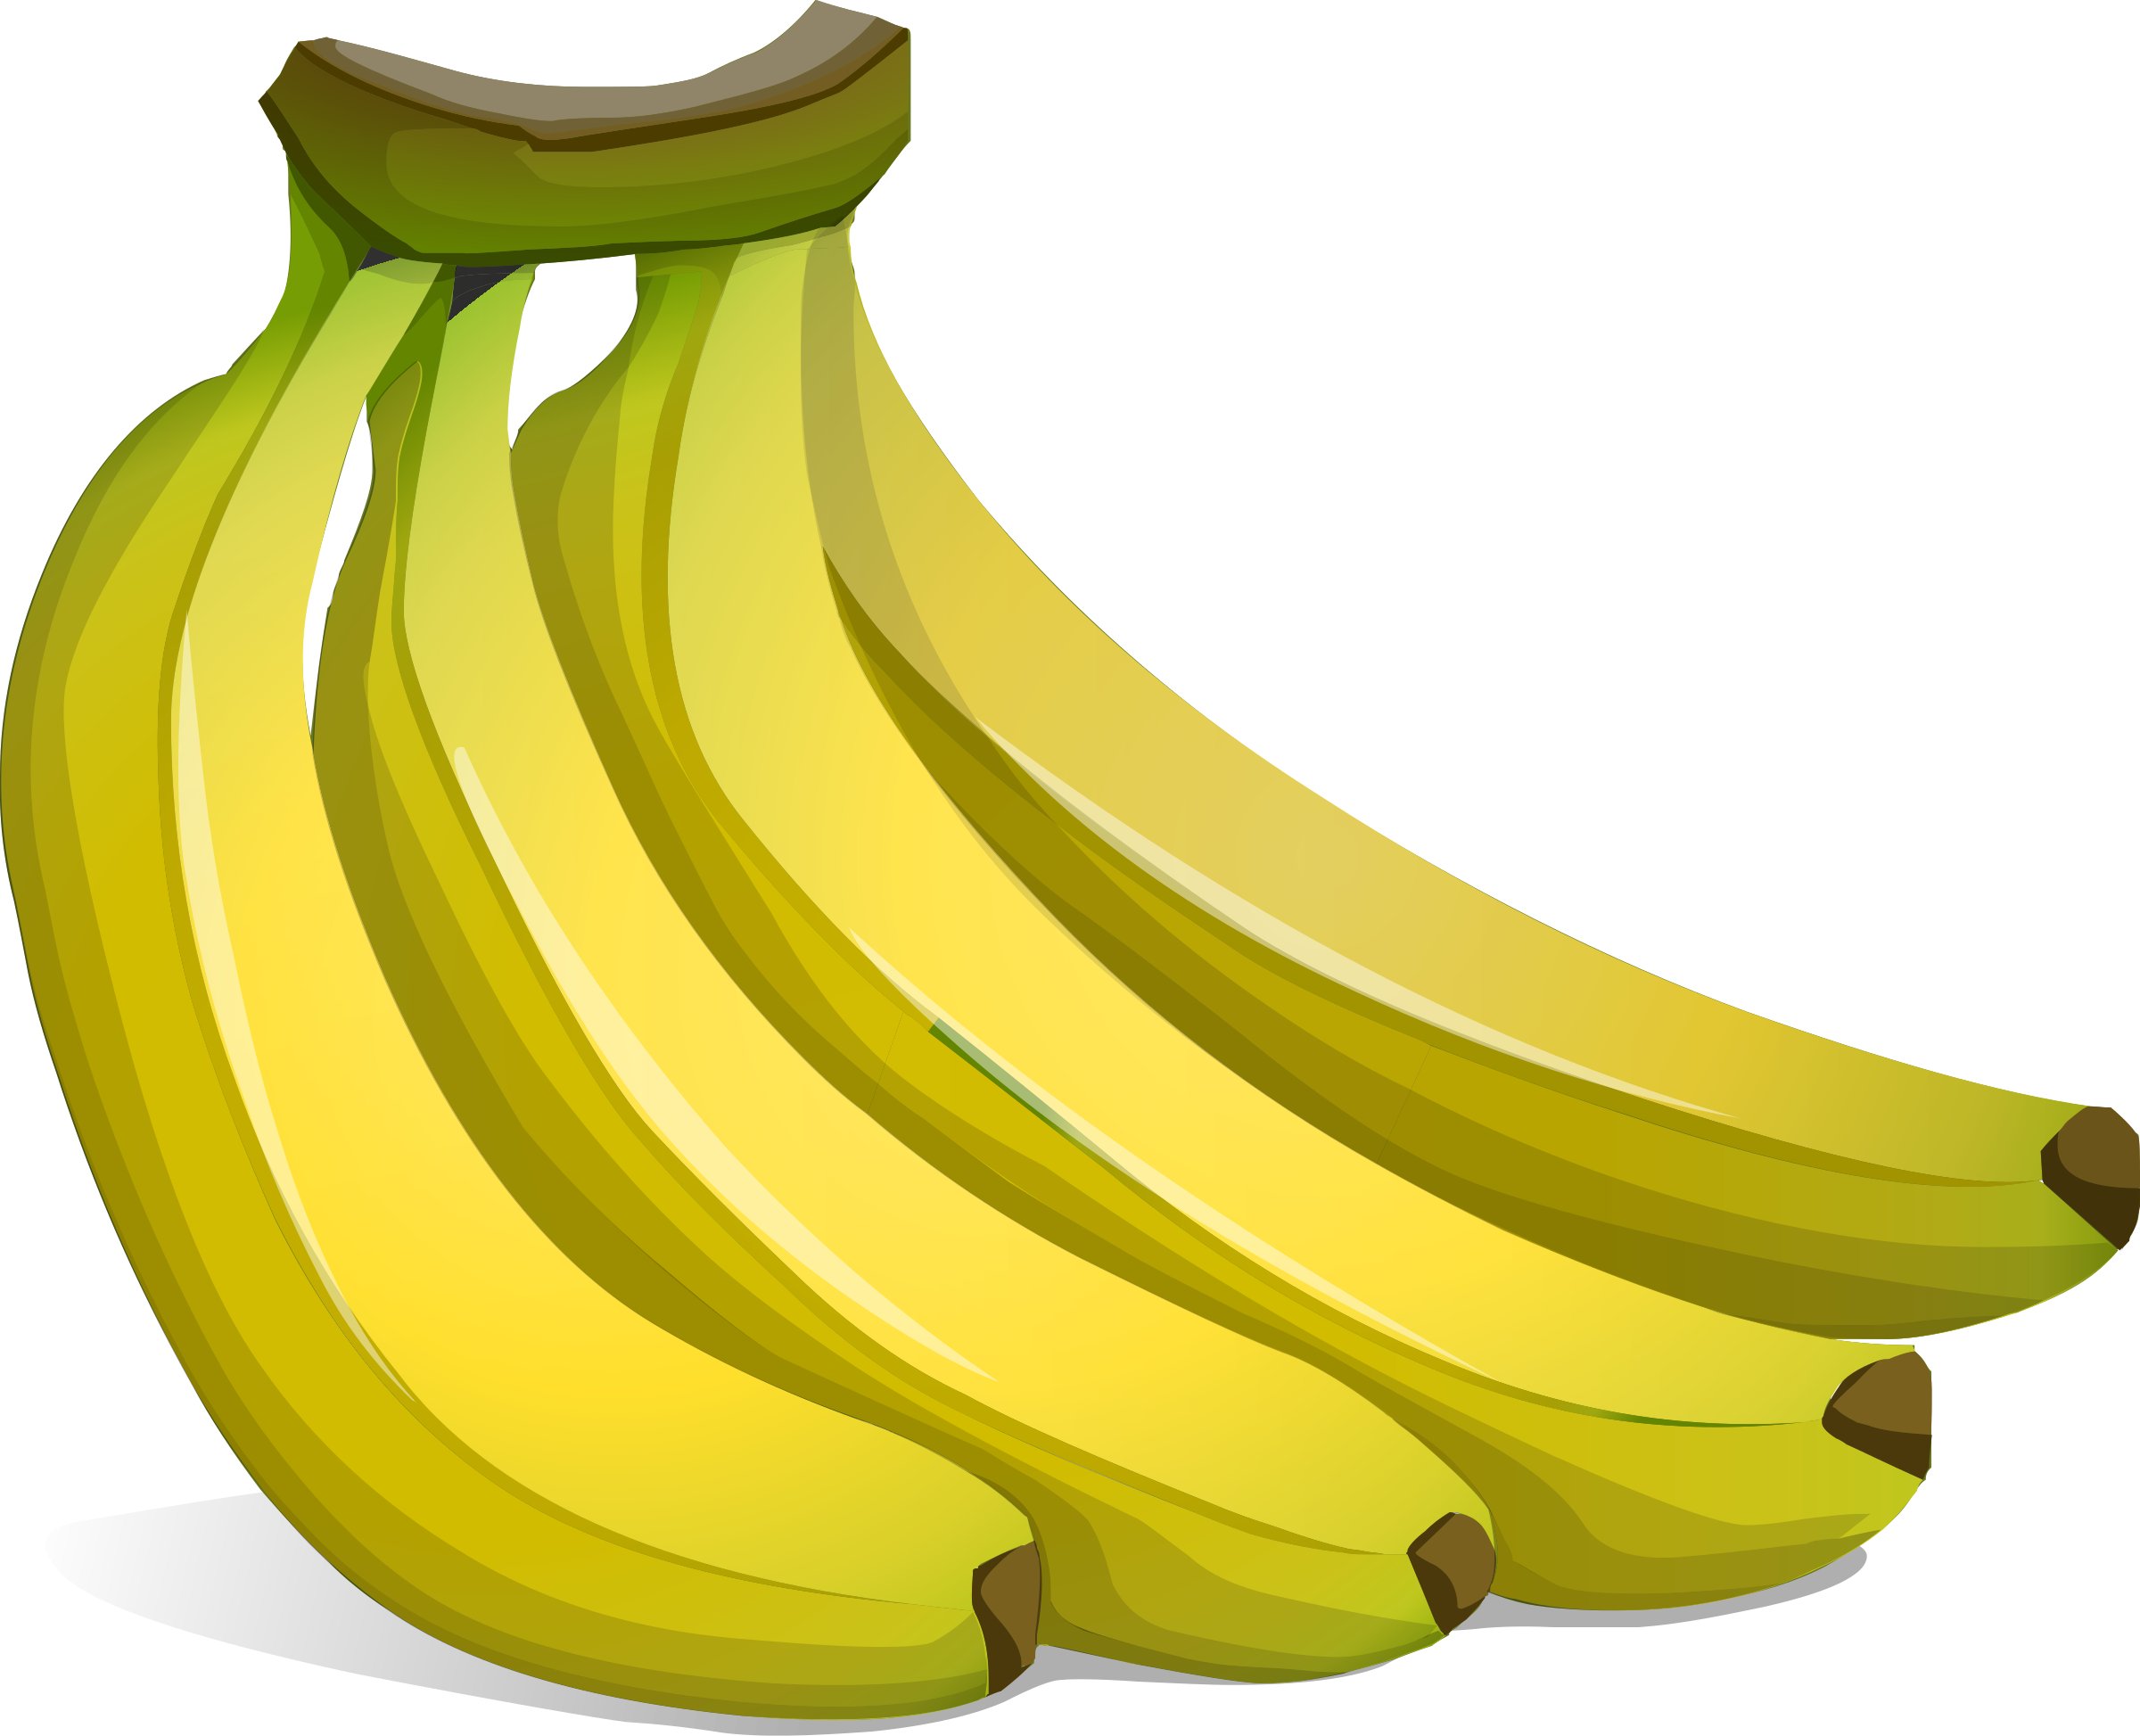 A bunch of bananas Icons PNG - Free PNG and Icons Downloads